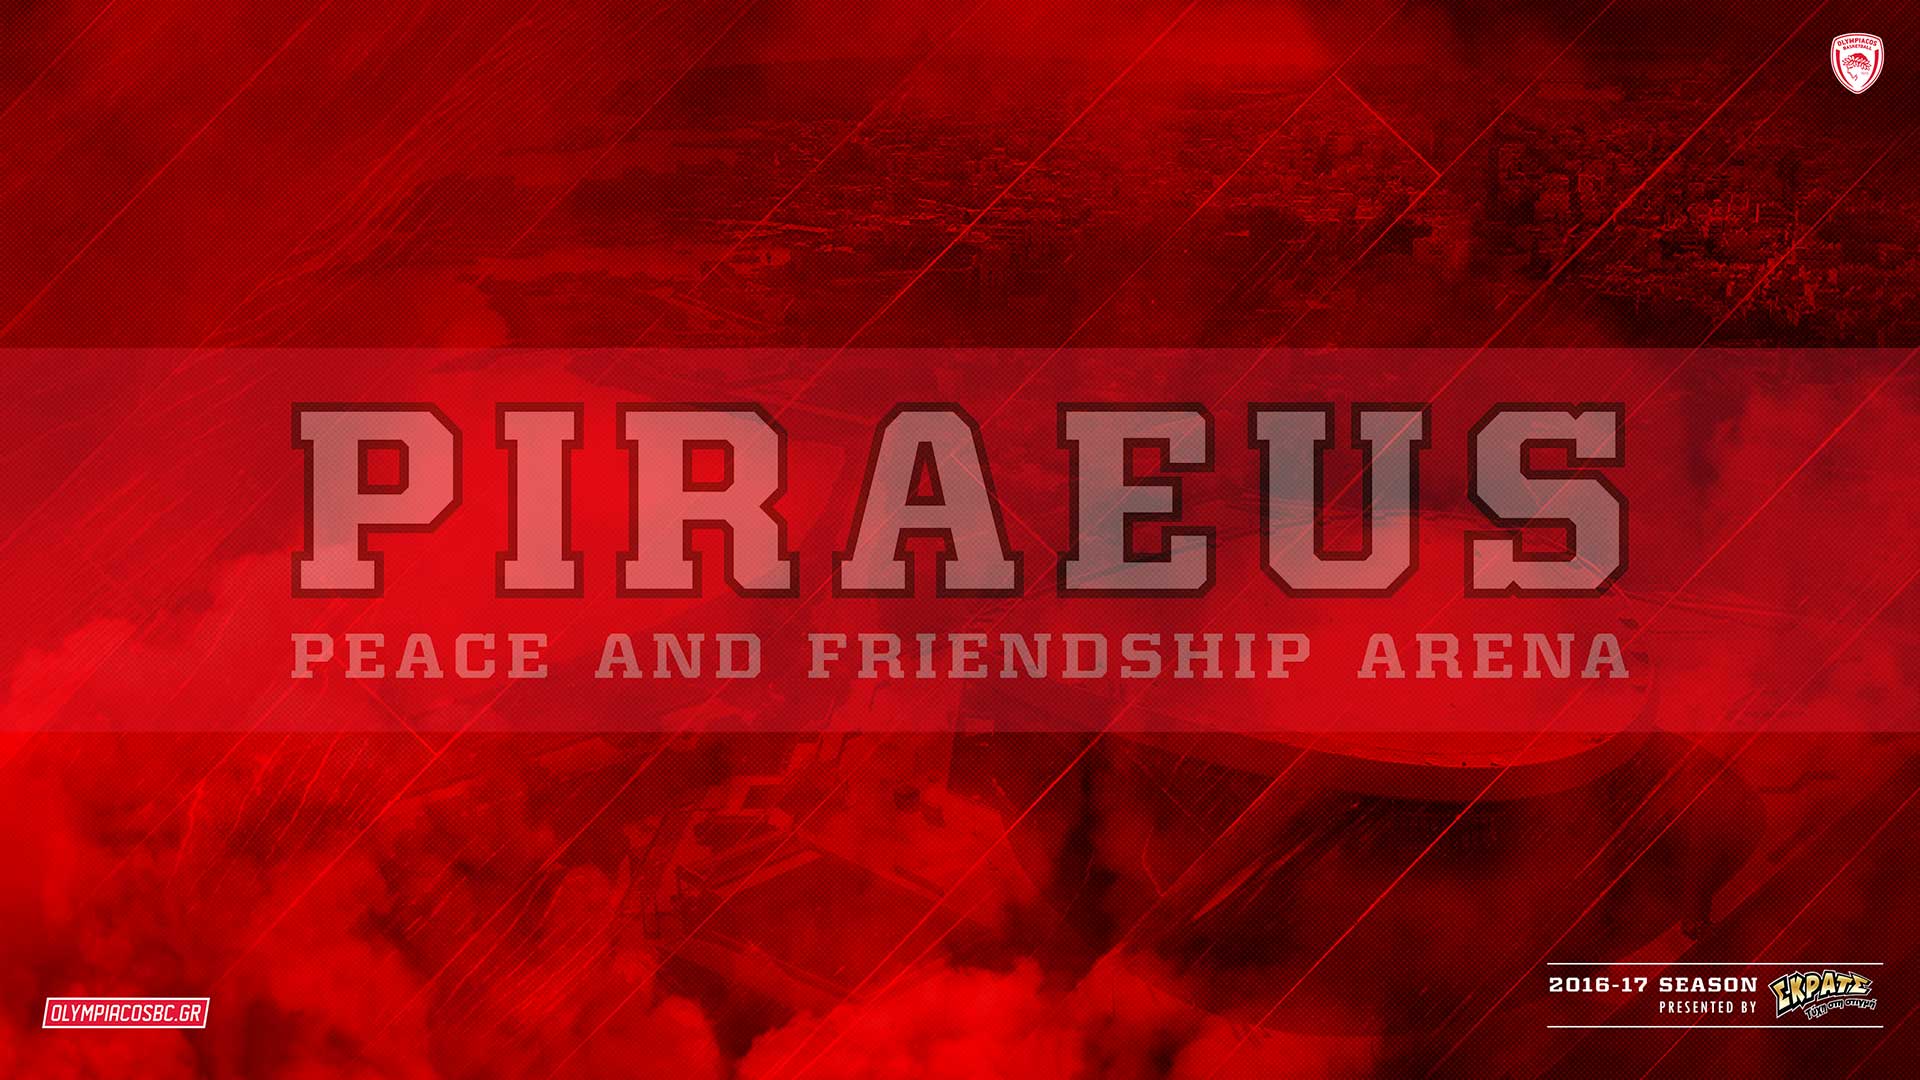 The New Red Wallpaper Olympiacos Bc